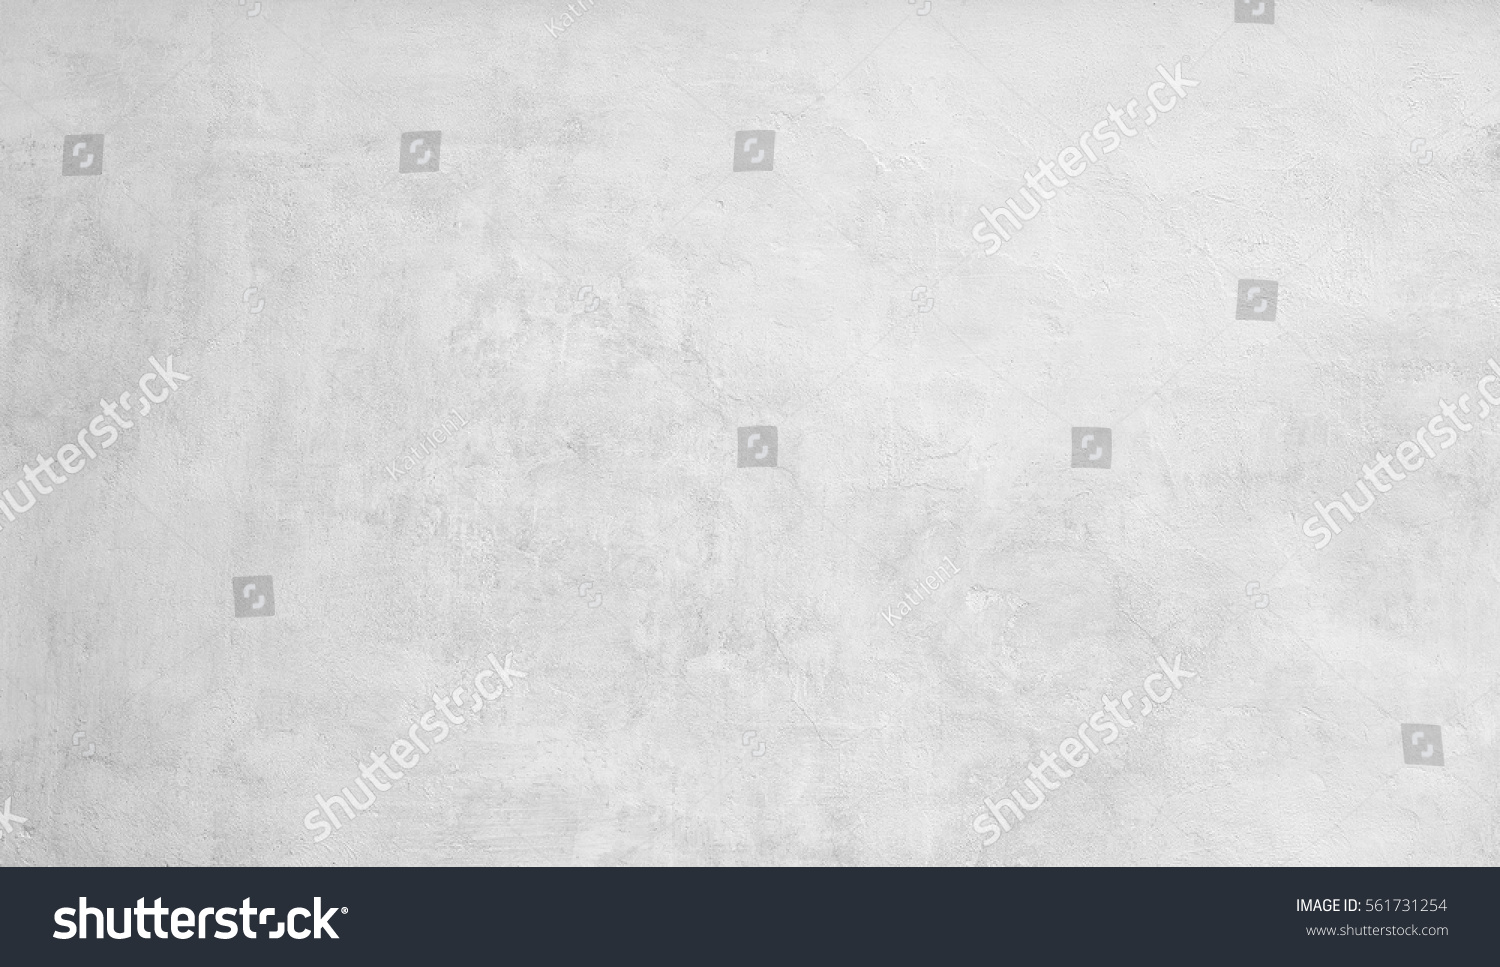 White stucco wall background. White painted cement wall texture #561731254